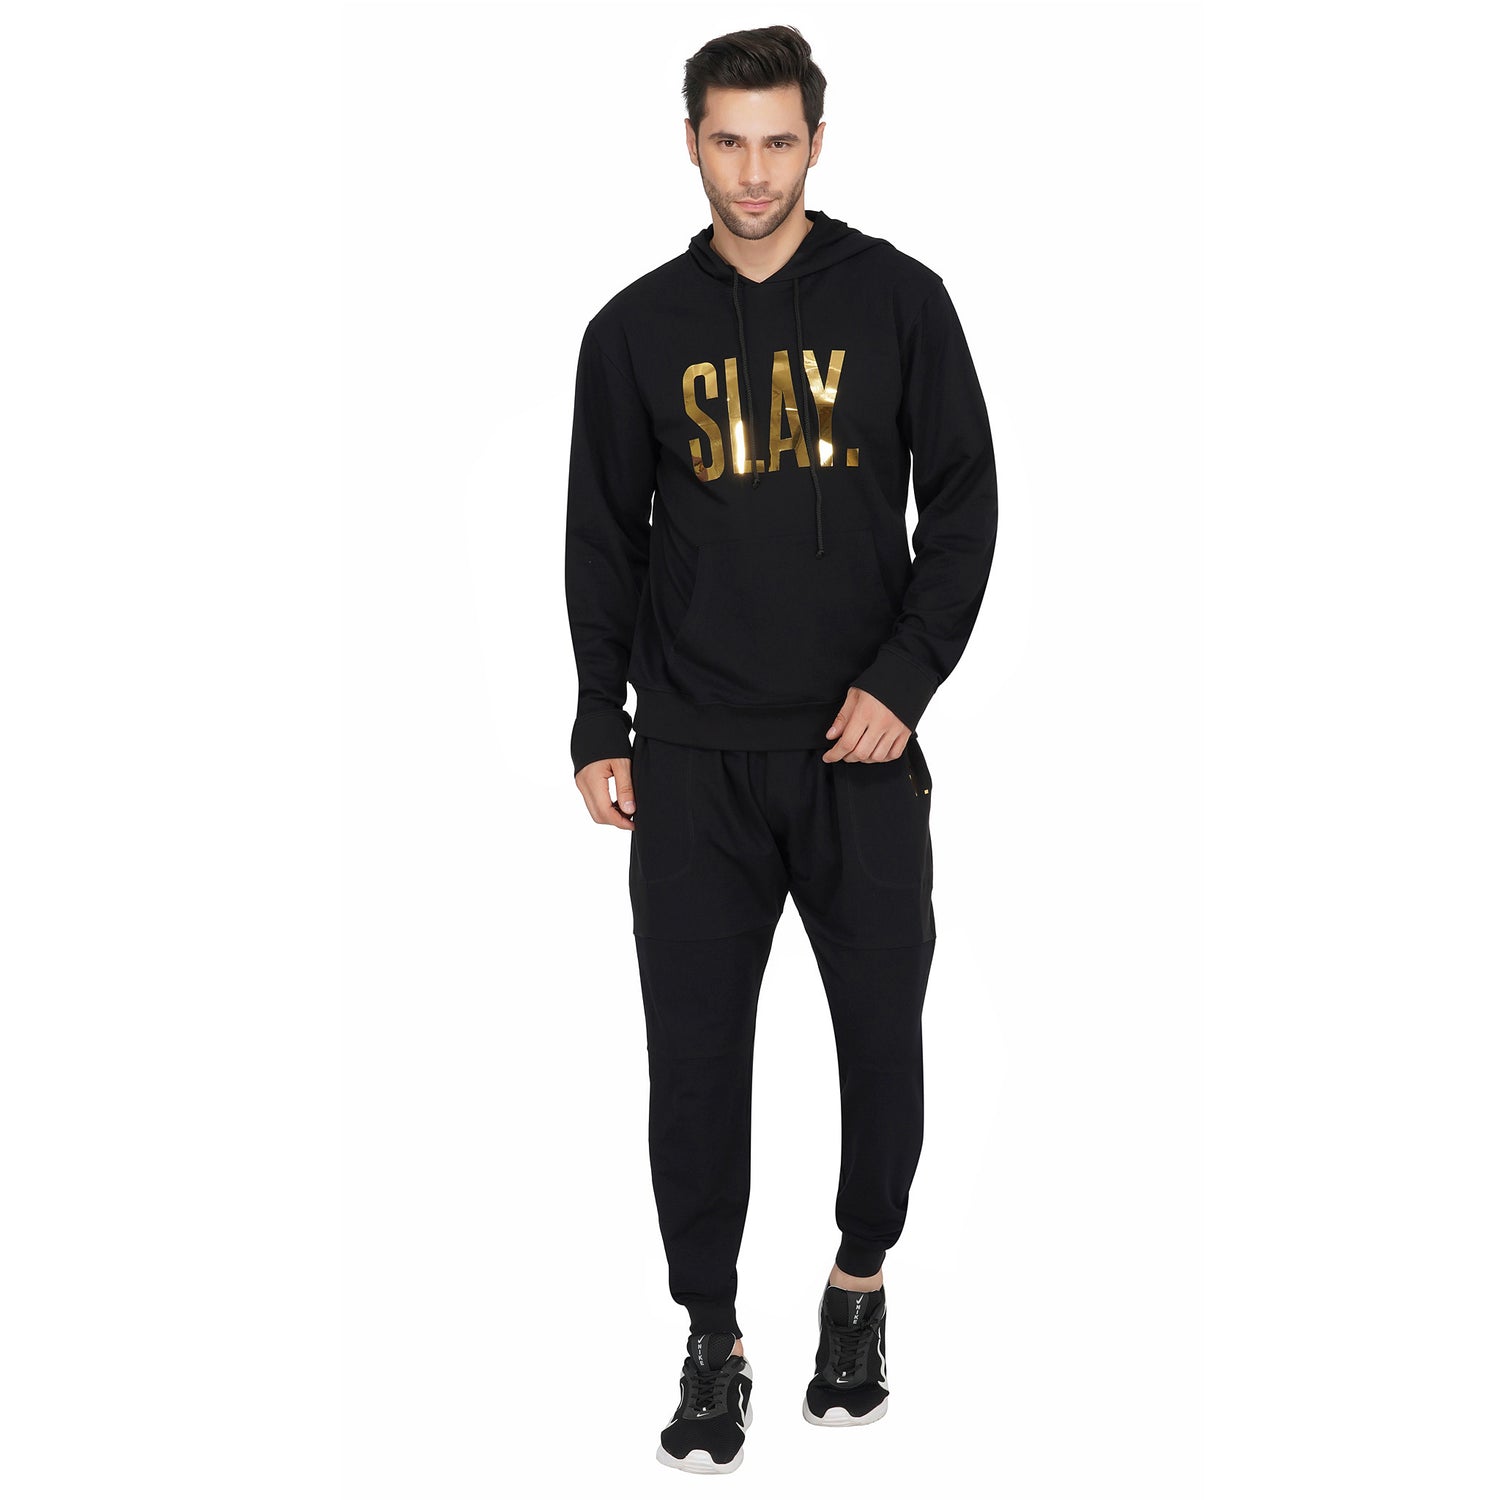 SLAY. Classic Men's Limited Edition Gold Foil Printed Black Printed Tracksuit-clothing-to-slay.myshopify.com-Tracksuit